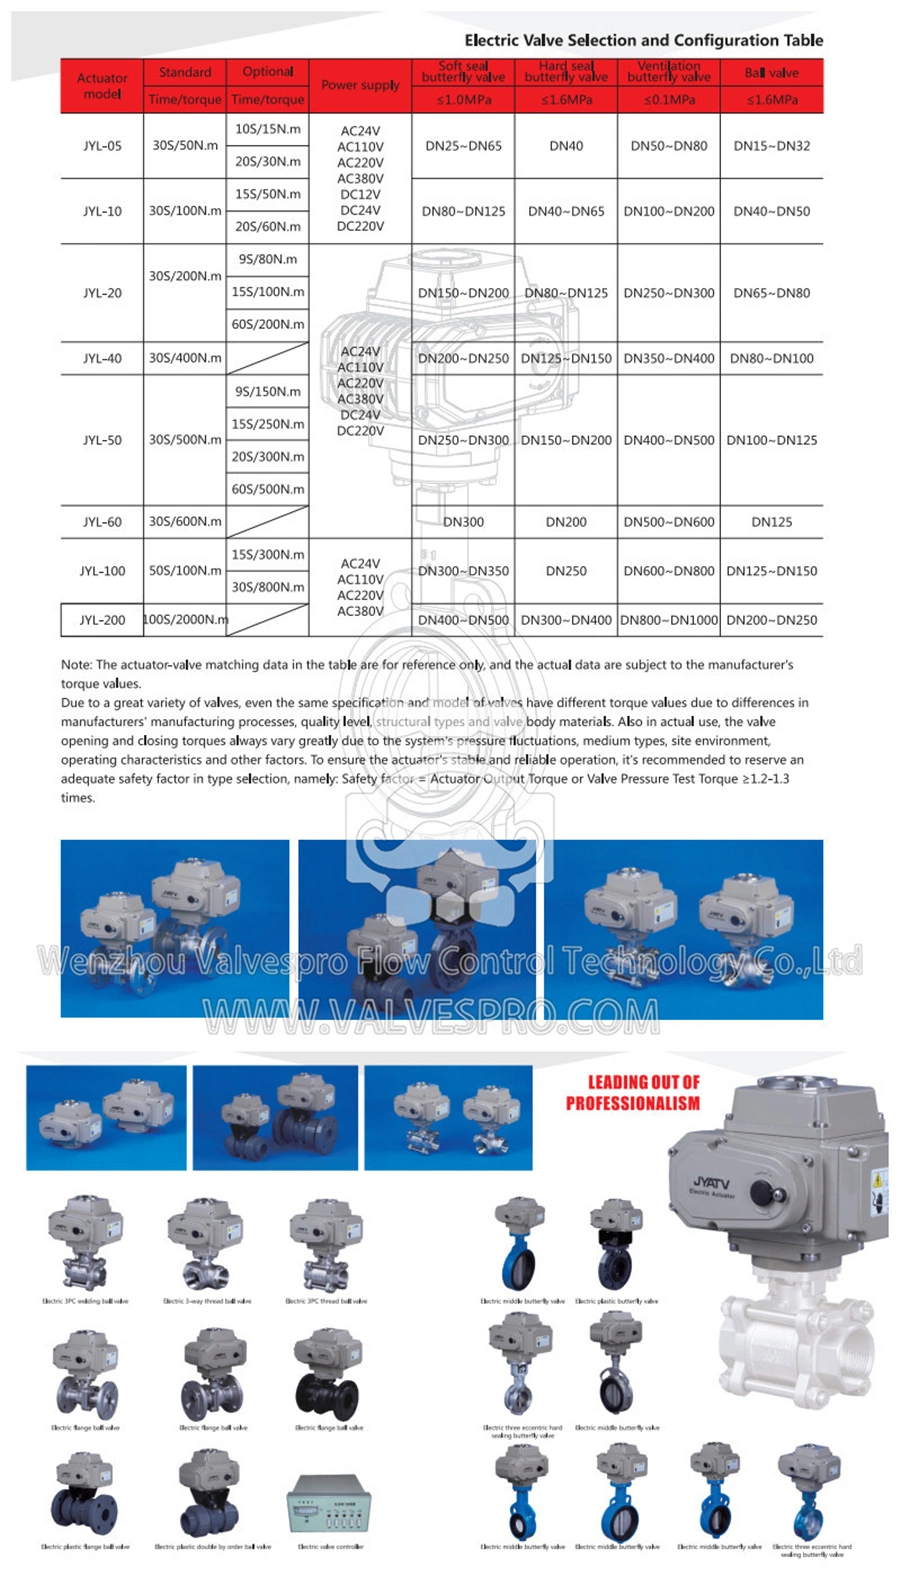 Jyl-05A Electric Actuator with Gear Box ISO5211 220VAC